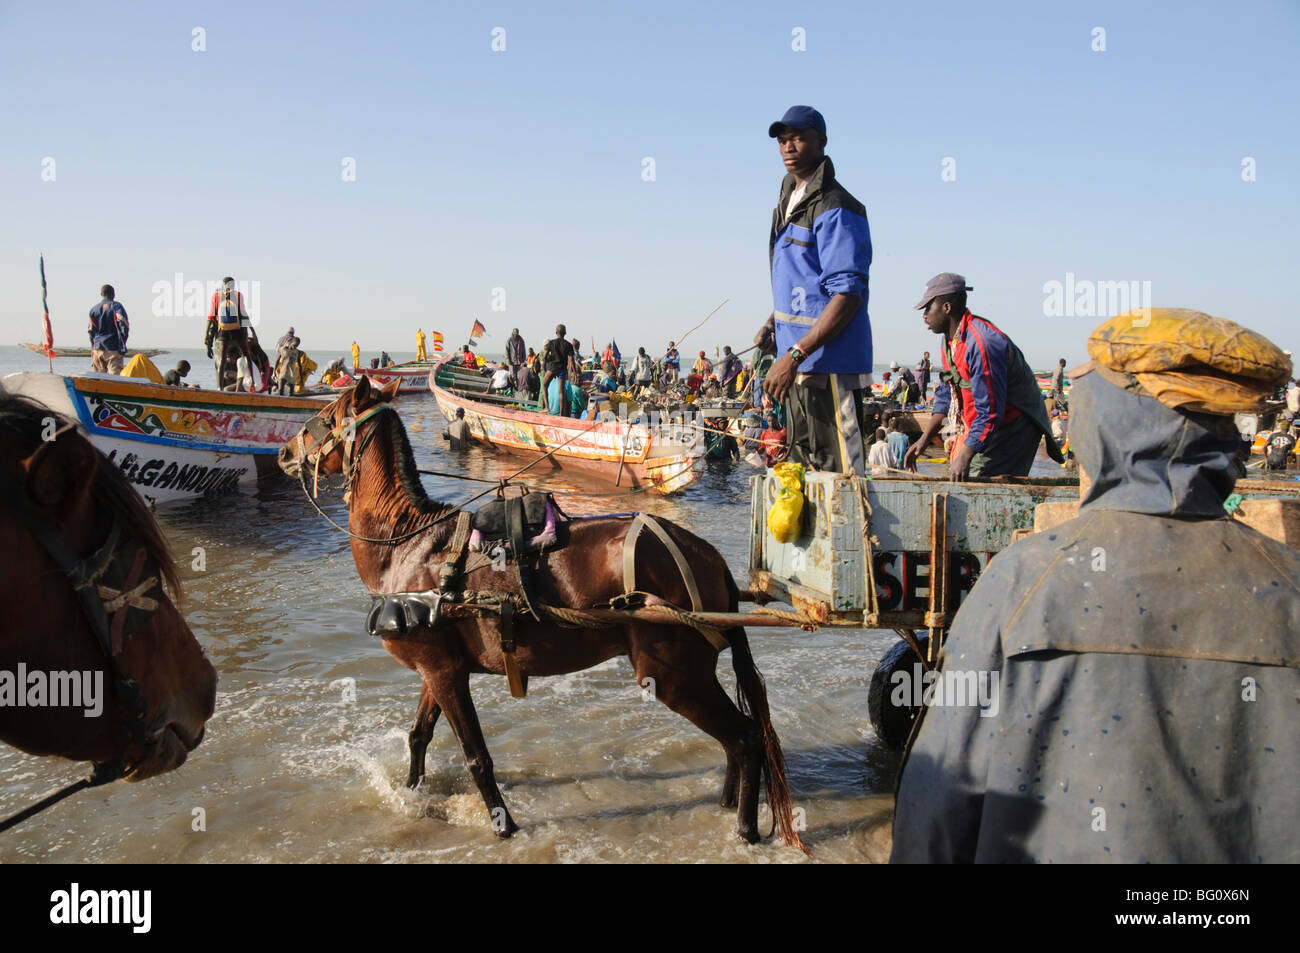 Unloading fishing boats (pirogues), Mbour Fish Market, Mbour, Senegal, West Africa, Africa Stock Photo